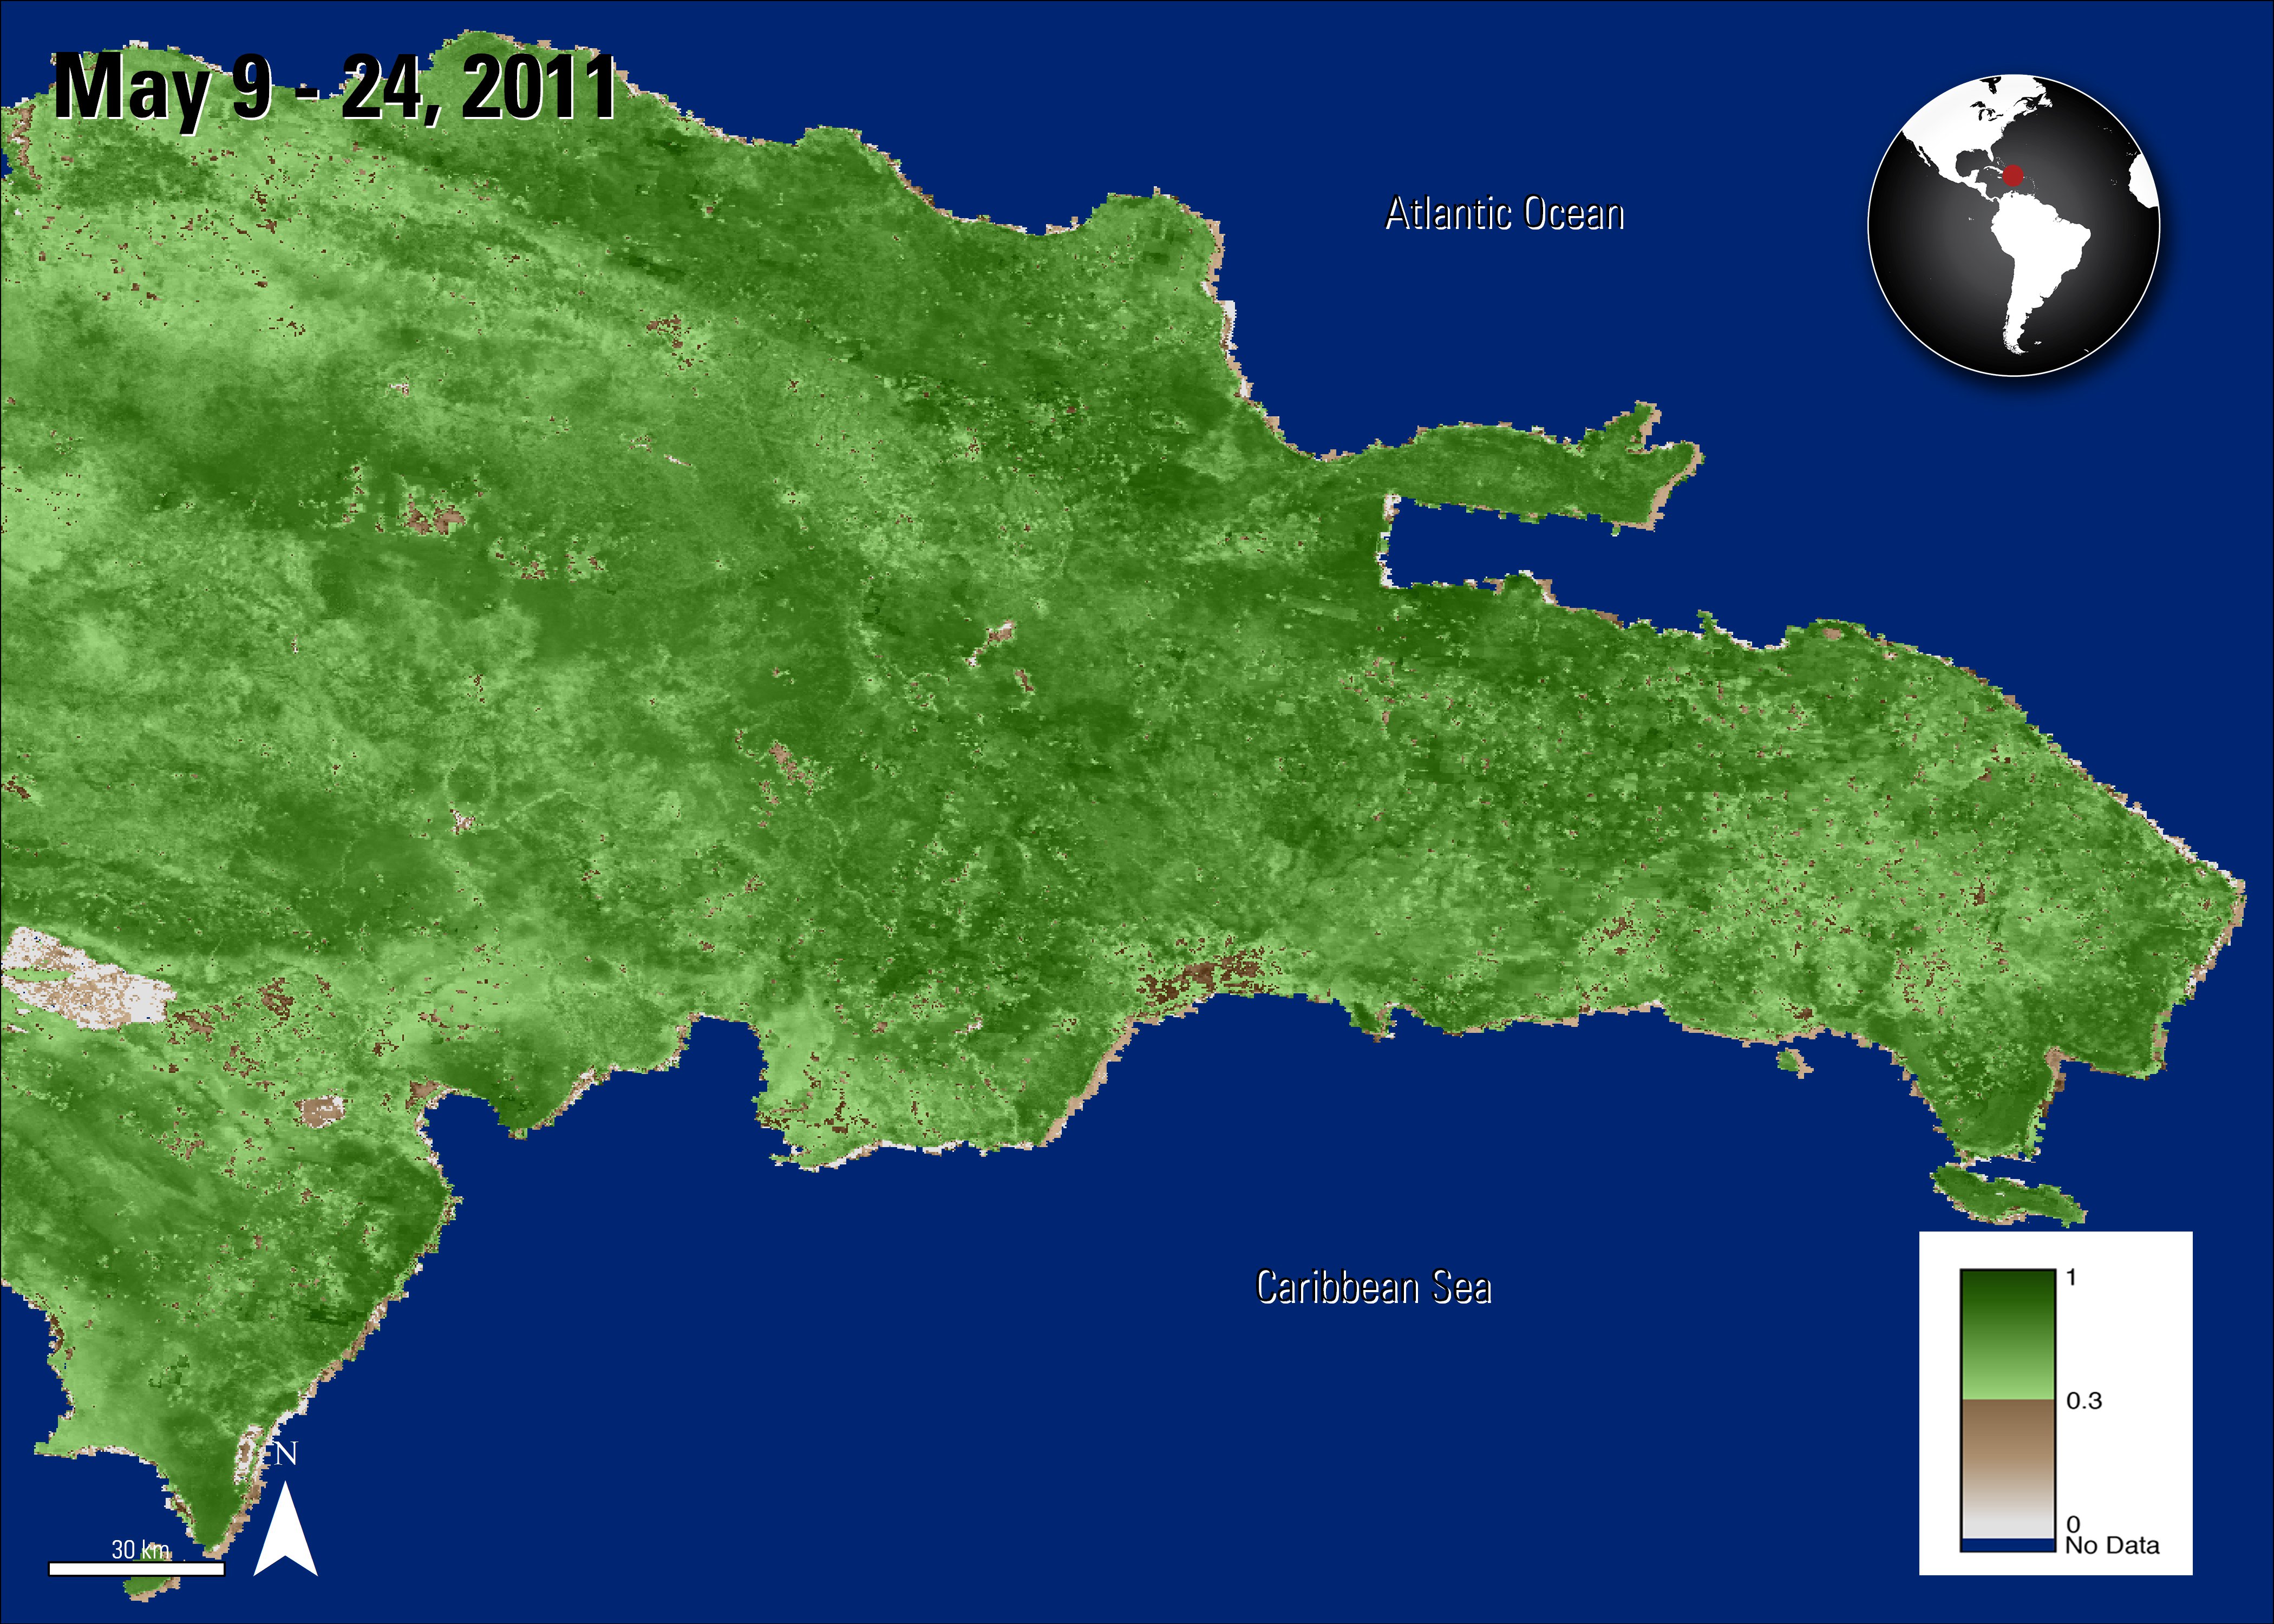 Terra MODIS MOD13Q1 NDVI data over the Dominican Republic, acquired between May 9 and 24, 2011.